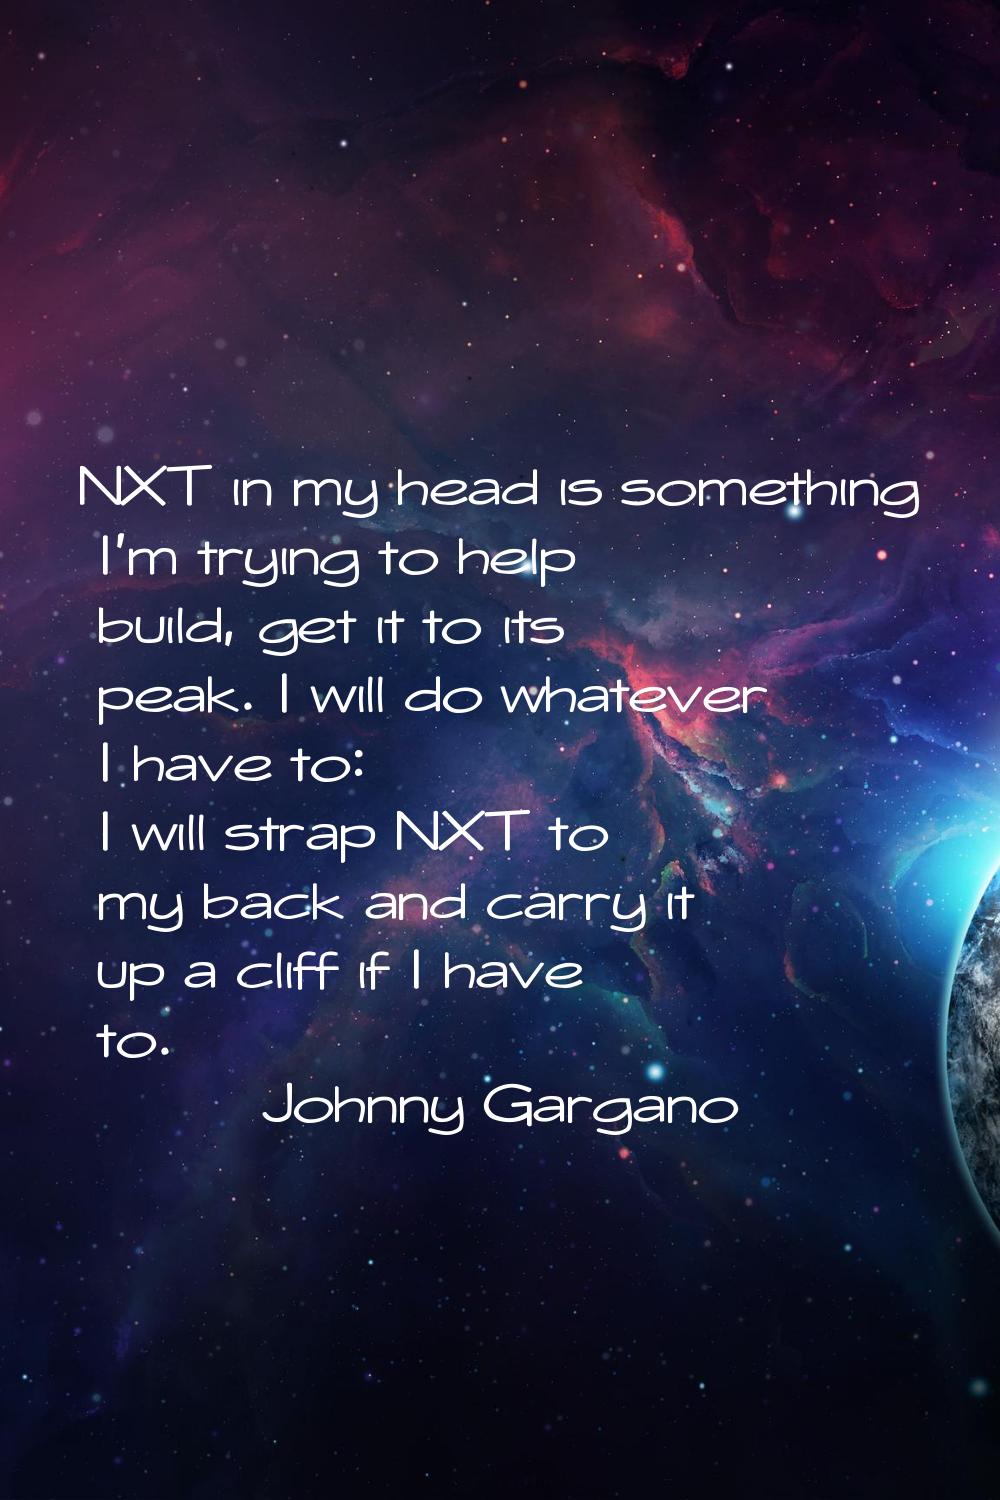 NXT in my head is something I'm trying to help build, get it to its peak. I will do whatever I have